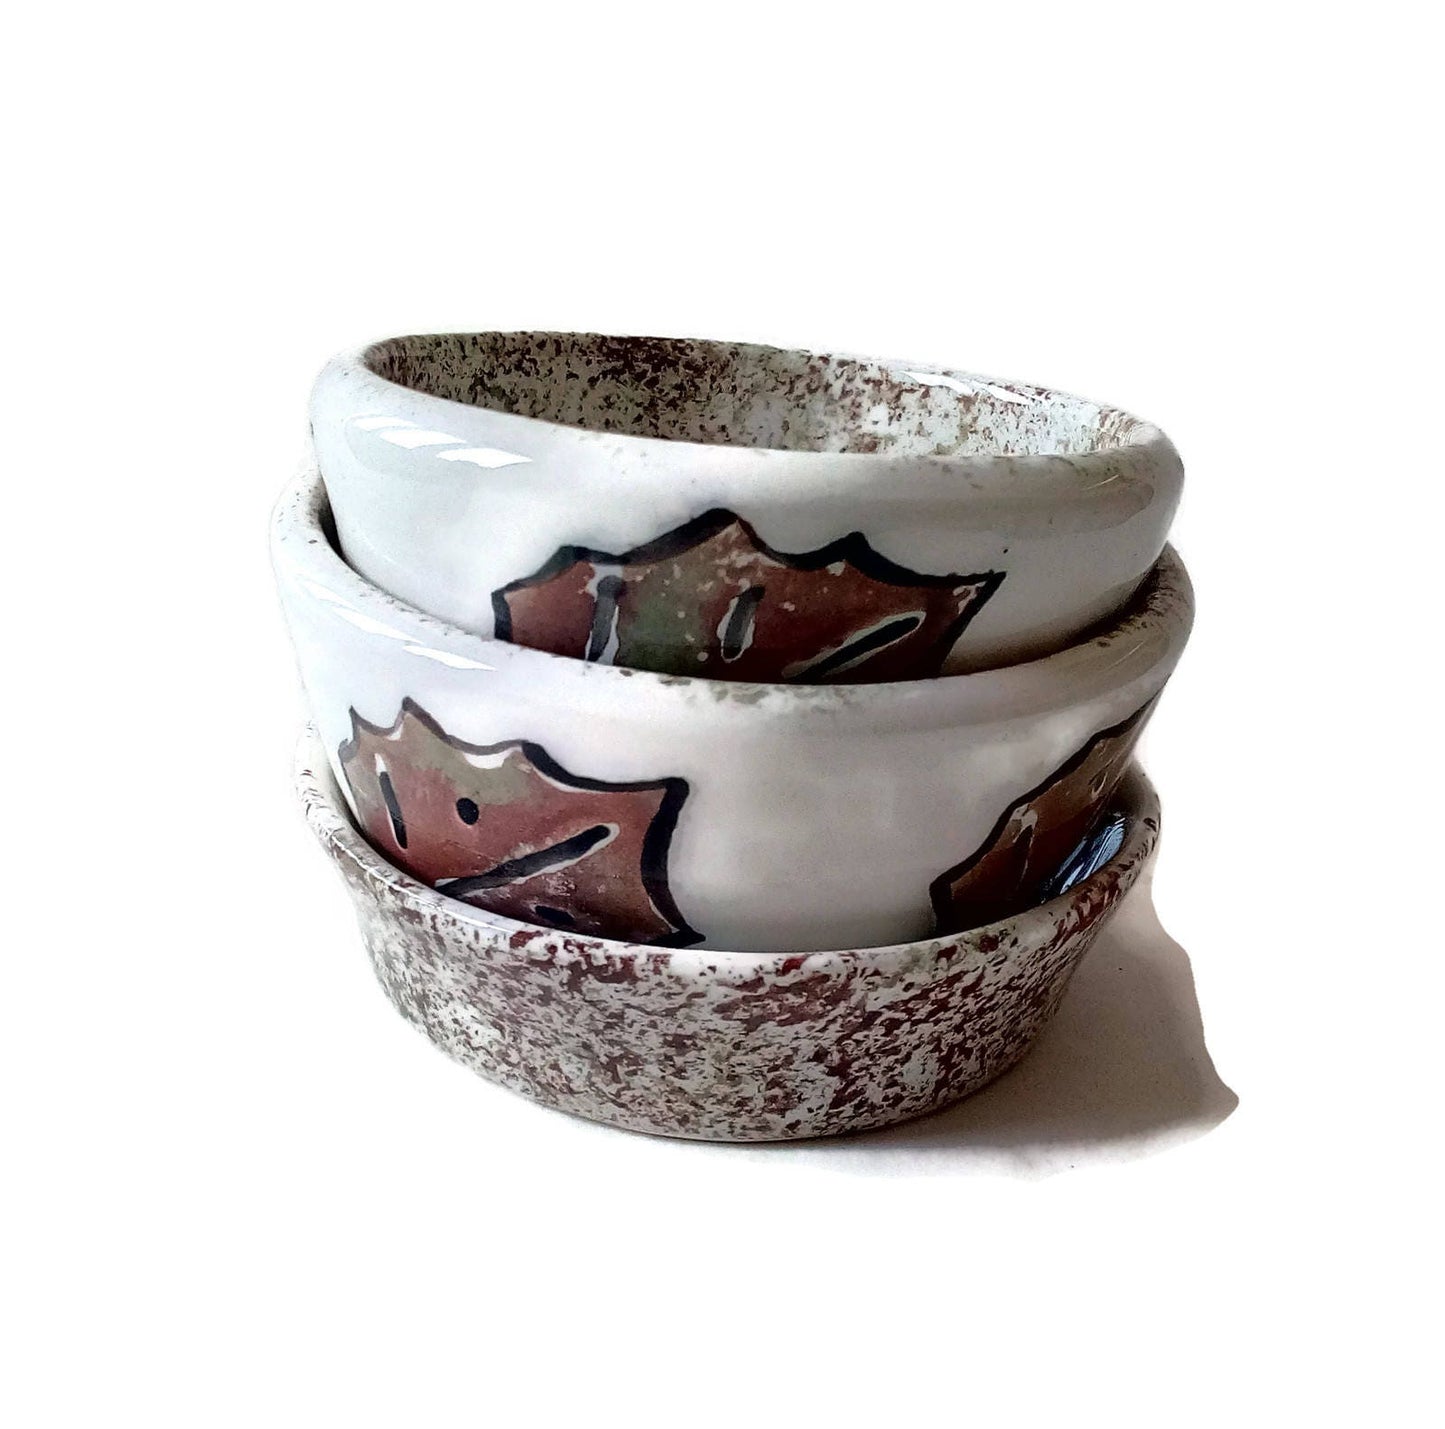 3Pc Handmade Ceramic Bowl Set With Hand Painted Leaves, Pottery Autumn Home Decor, Unique Gifts For Bakers, Mom Birthday gift From Daughter - Ceramica Ana Rafael